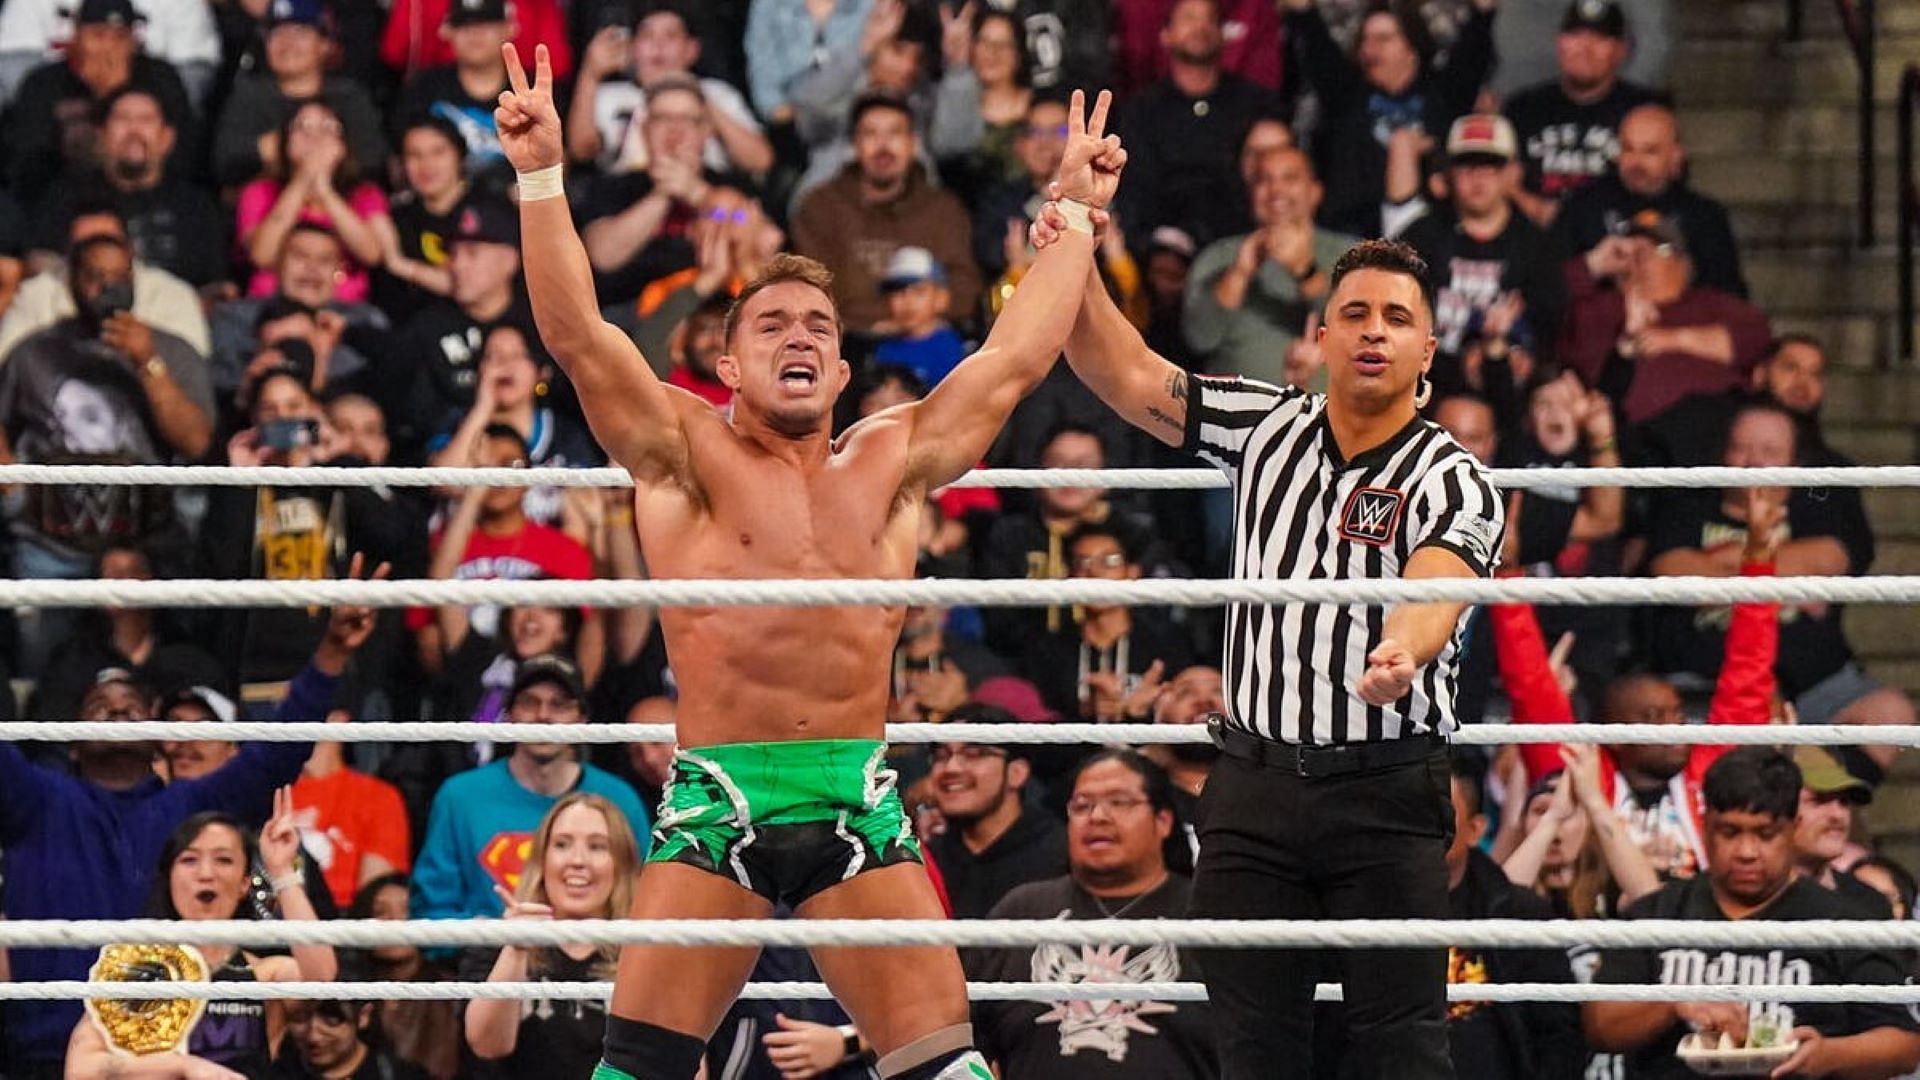 Chad Gable has won over the fans with his hard work and dedication